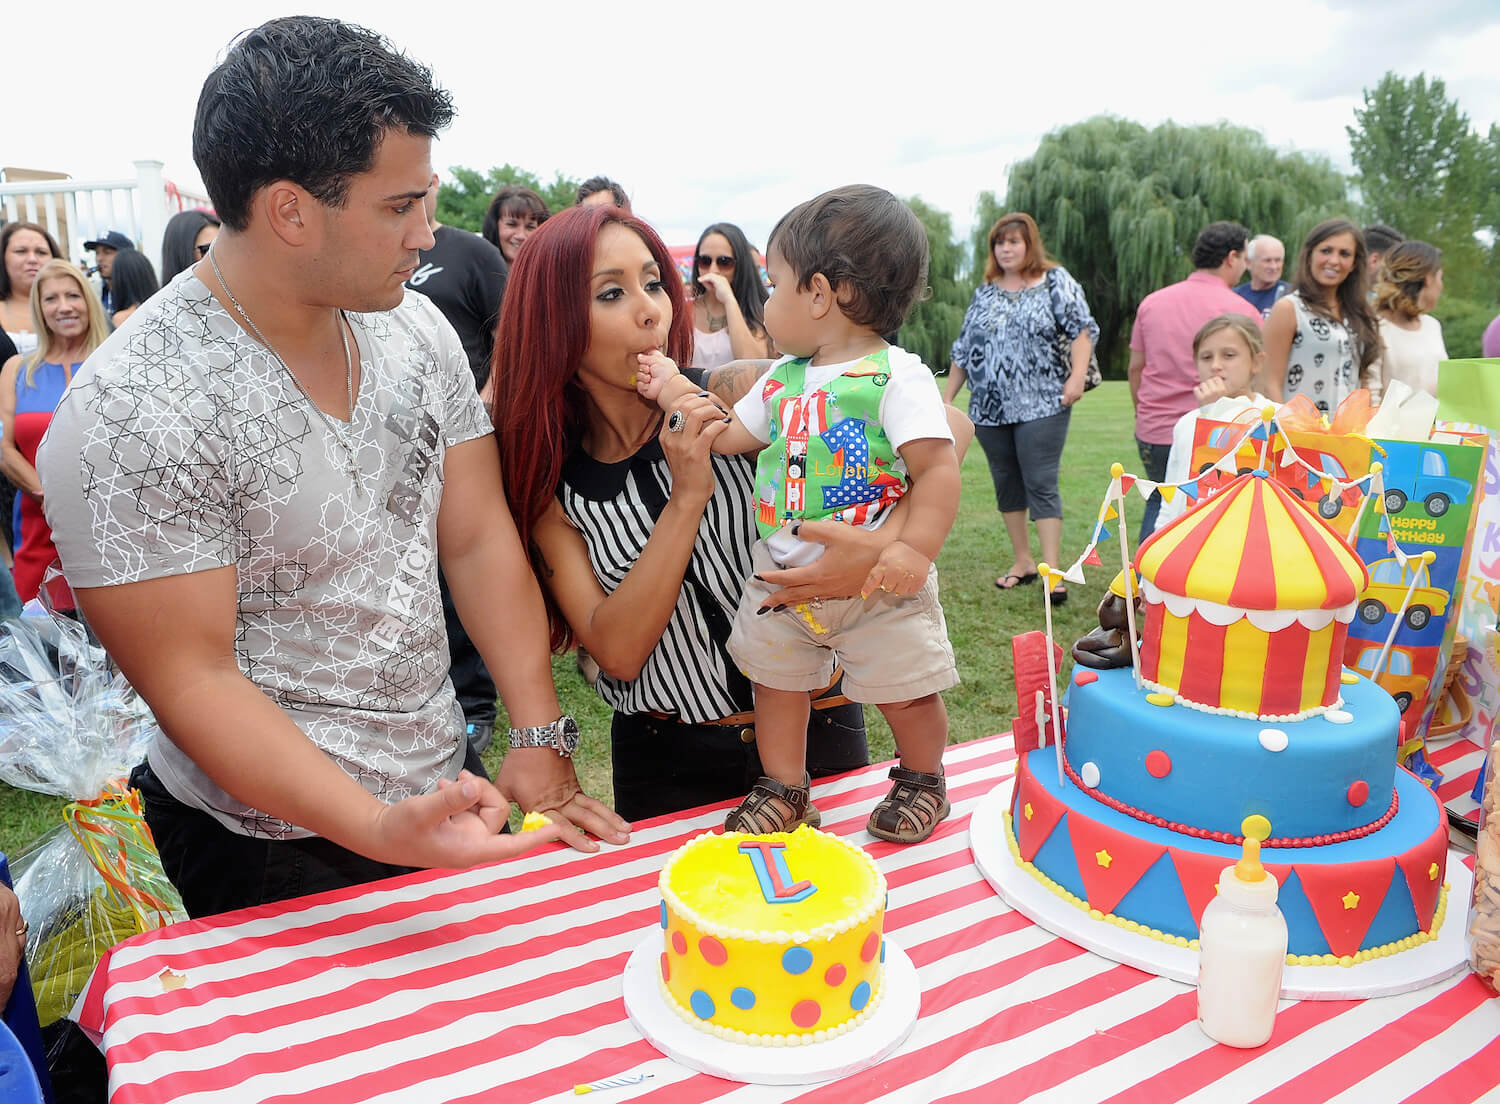 Jionni LaValle and 'Jersey Shore' star Nicole 'Snooki' Polizzi celebrating their son Lorenzo's first birthday. Snooki is holding her son. They're all standing in front of a birthday cake.